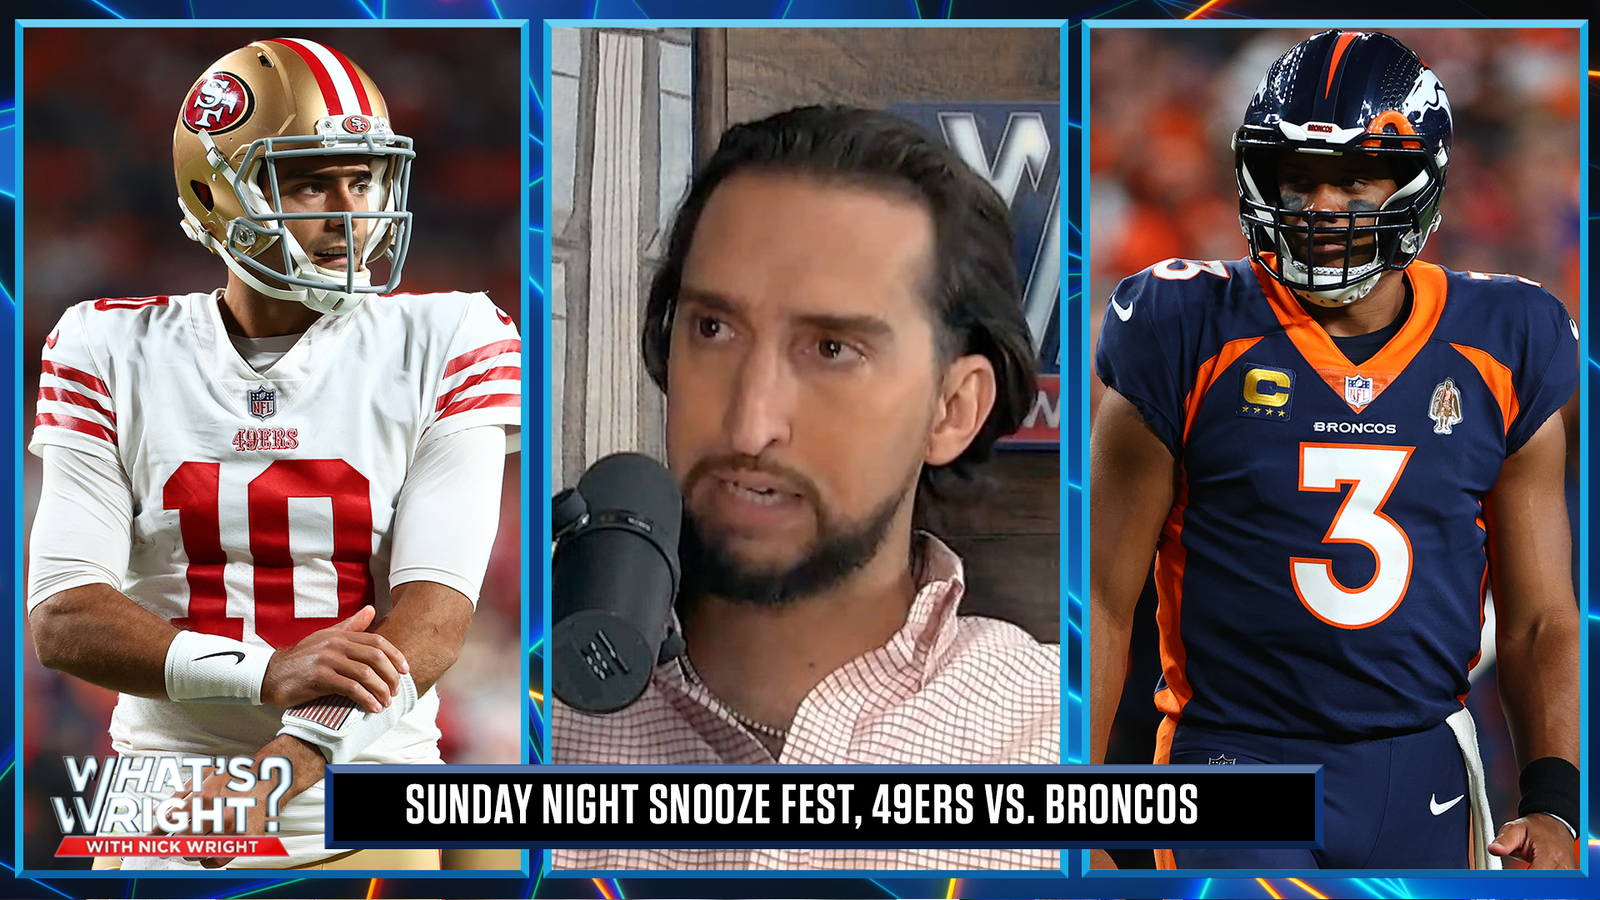 49ers vs. Broncos was one of the worst NFL games Nick has ever seen